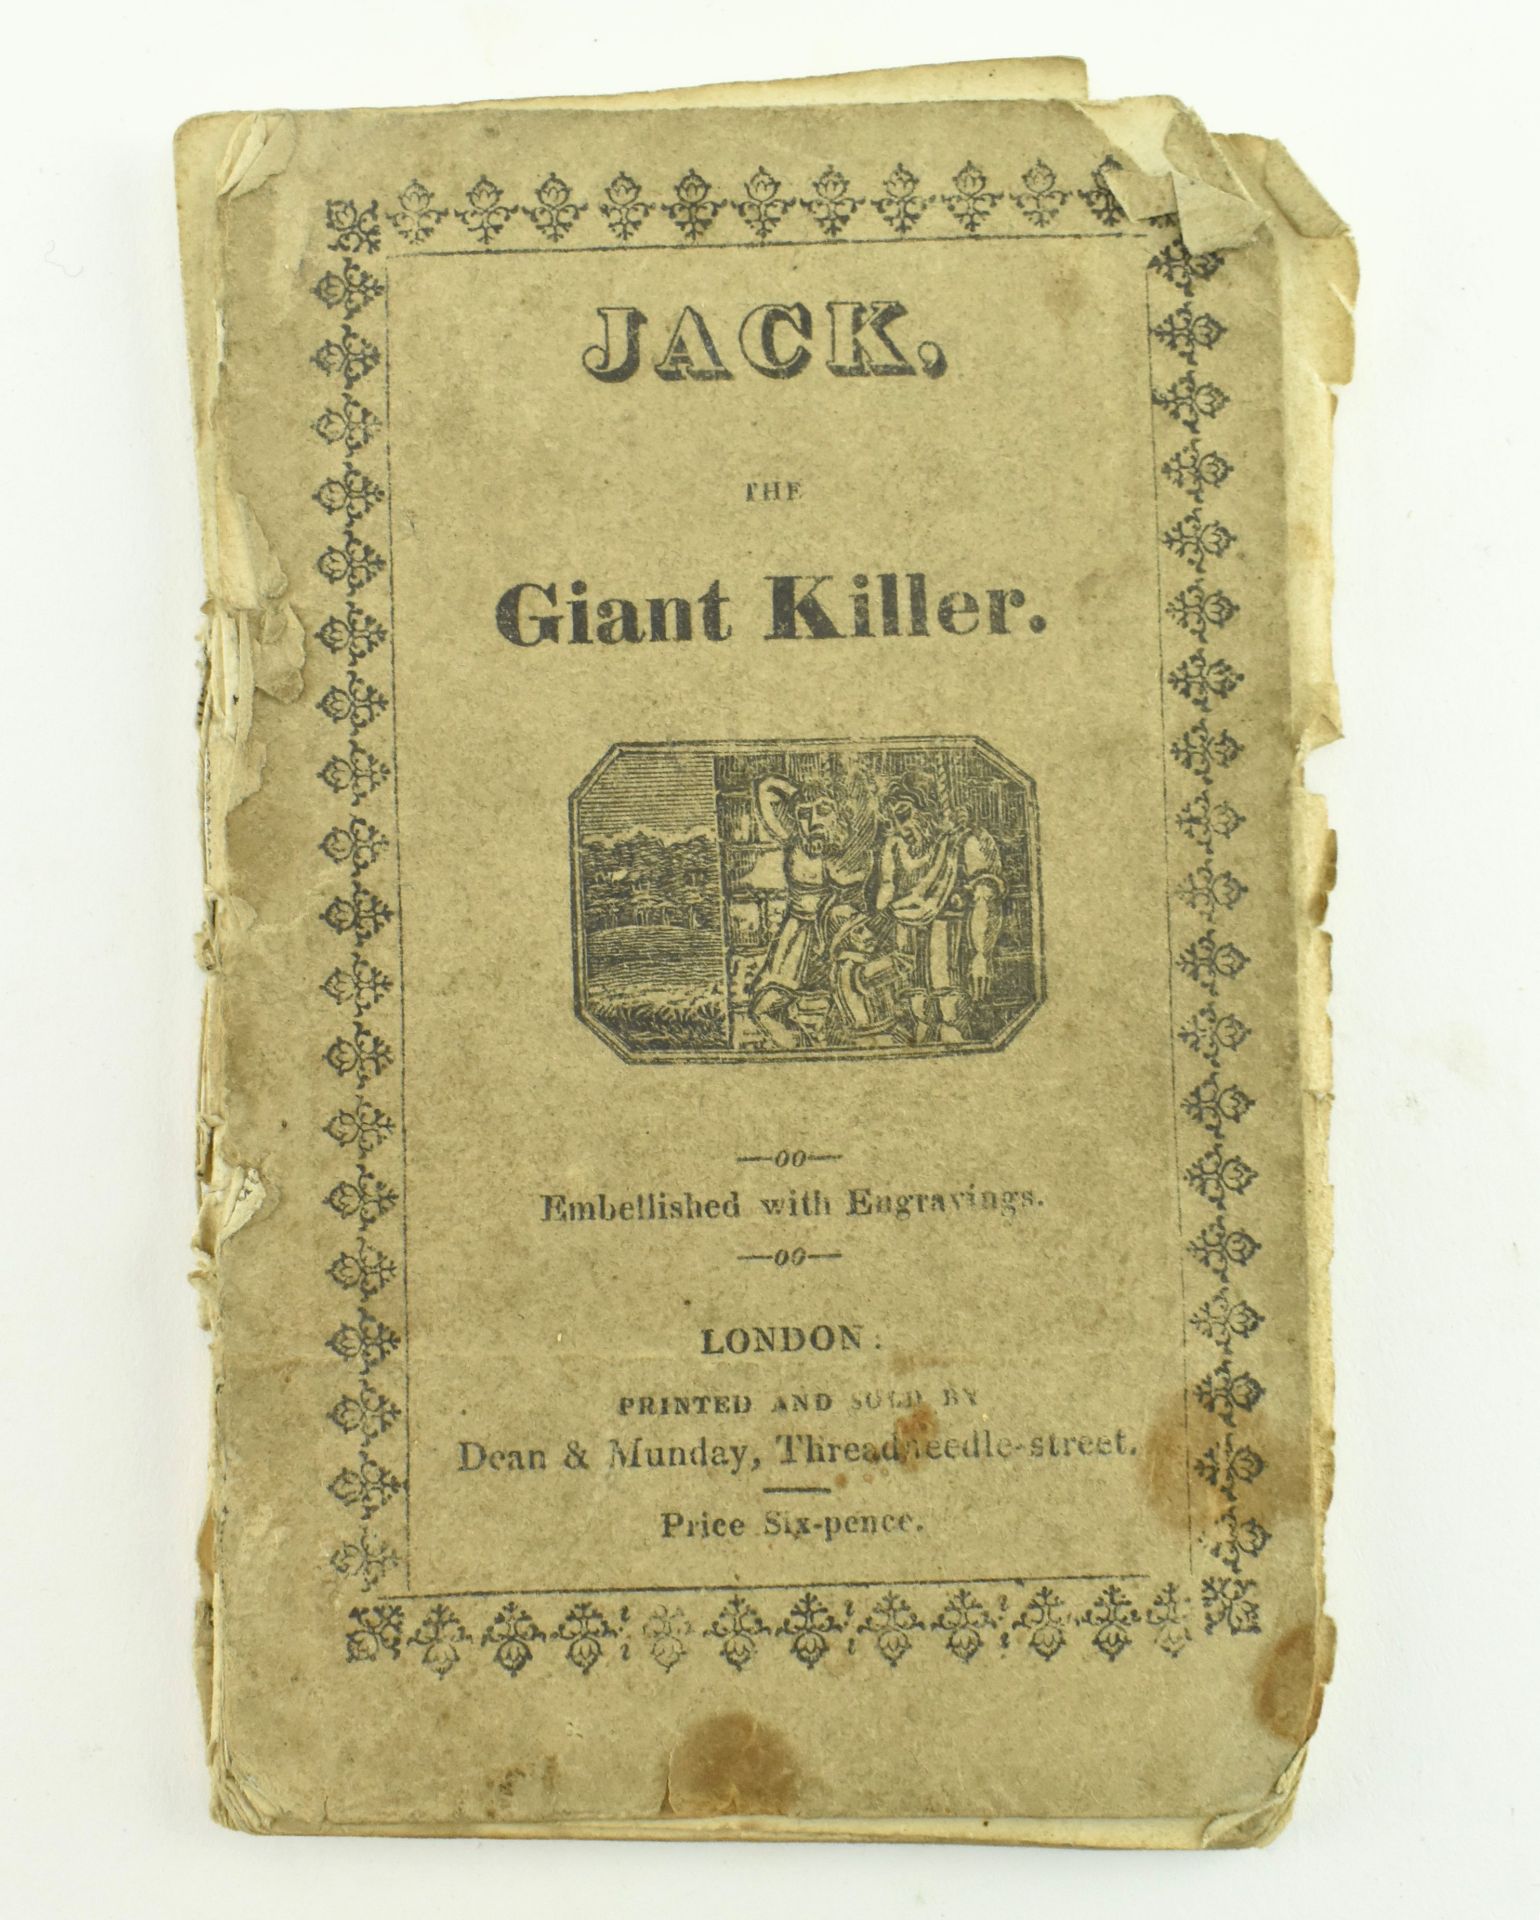 CHAPBOOK. CIRCA 1820 THE HISTORY OF JACK THE GIANT KILLER